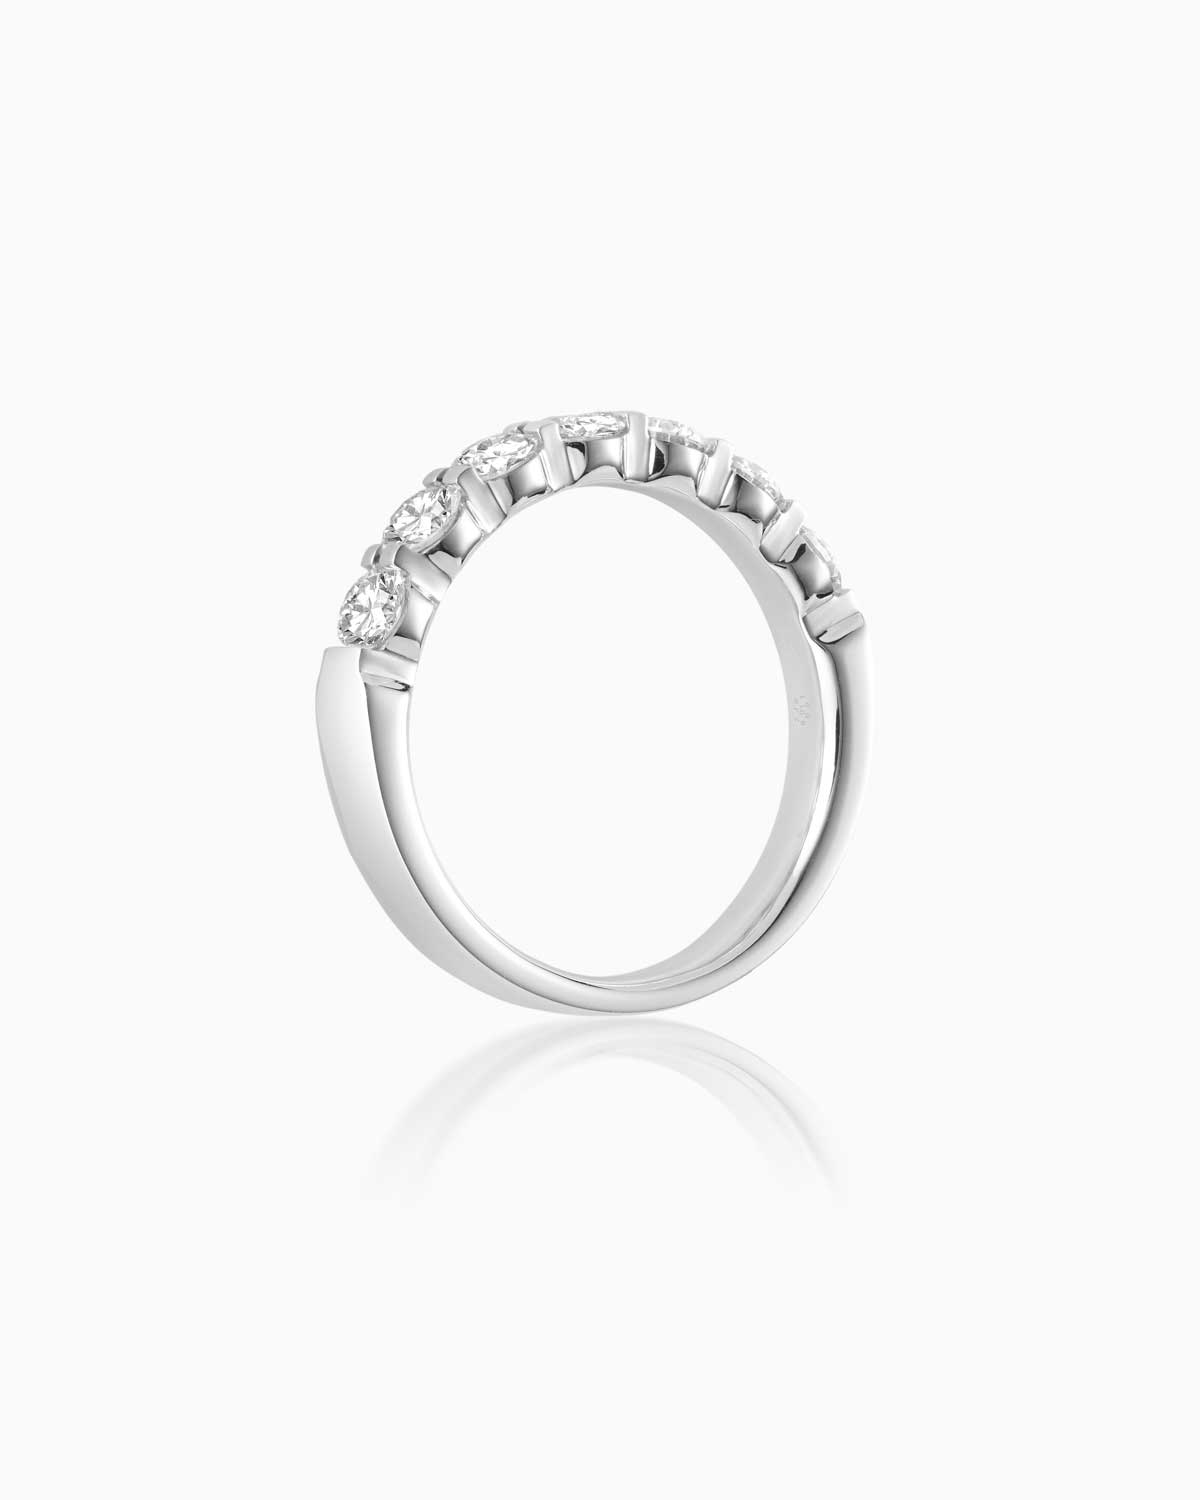 7 stone quintessential diamond wedding band in 18 karat white gold by claude and me jewellery.